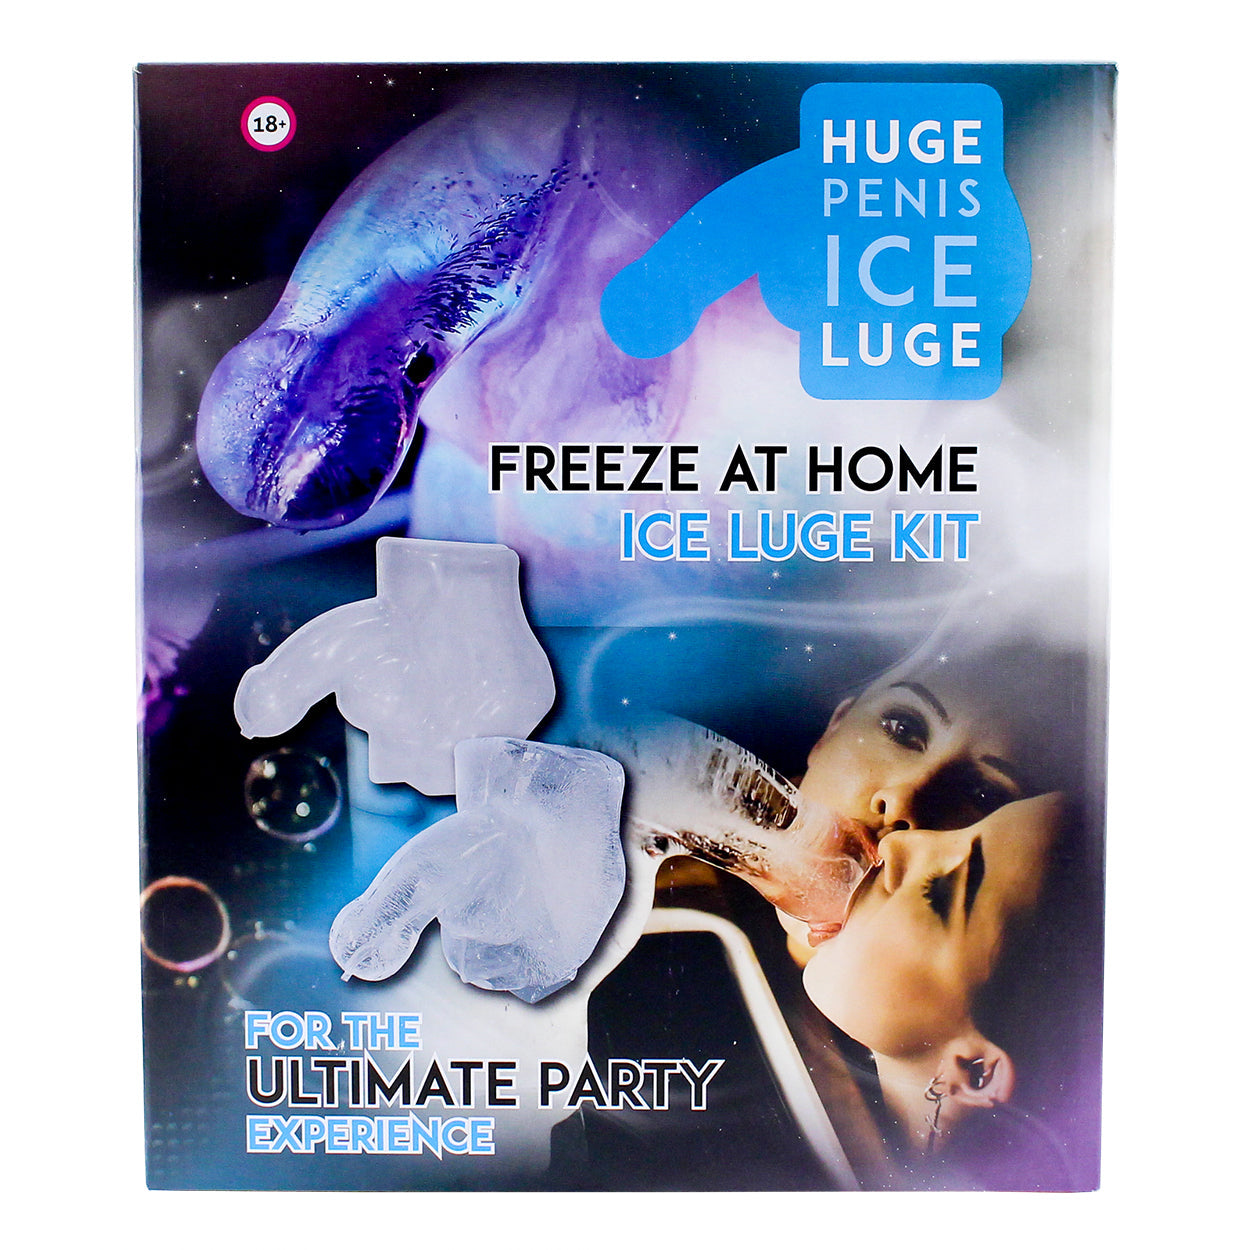 Image of A Giant Penis Ice Luge Kit